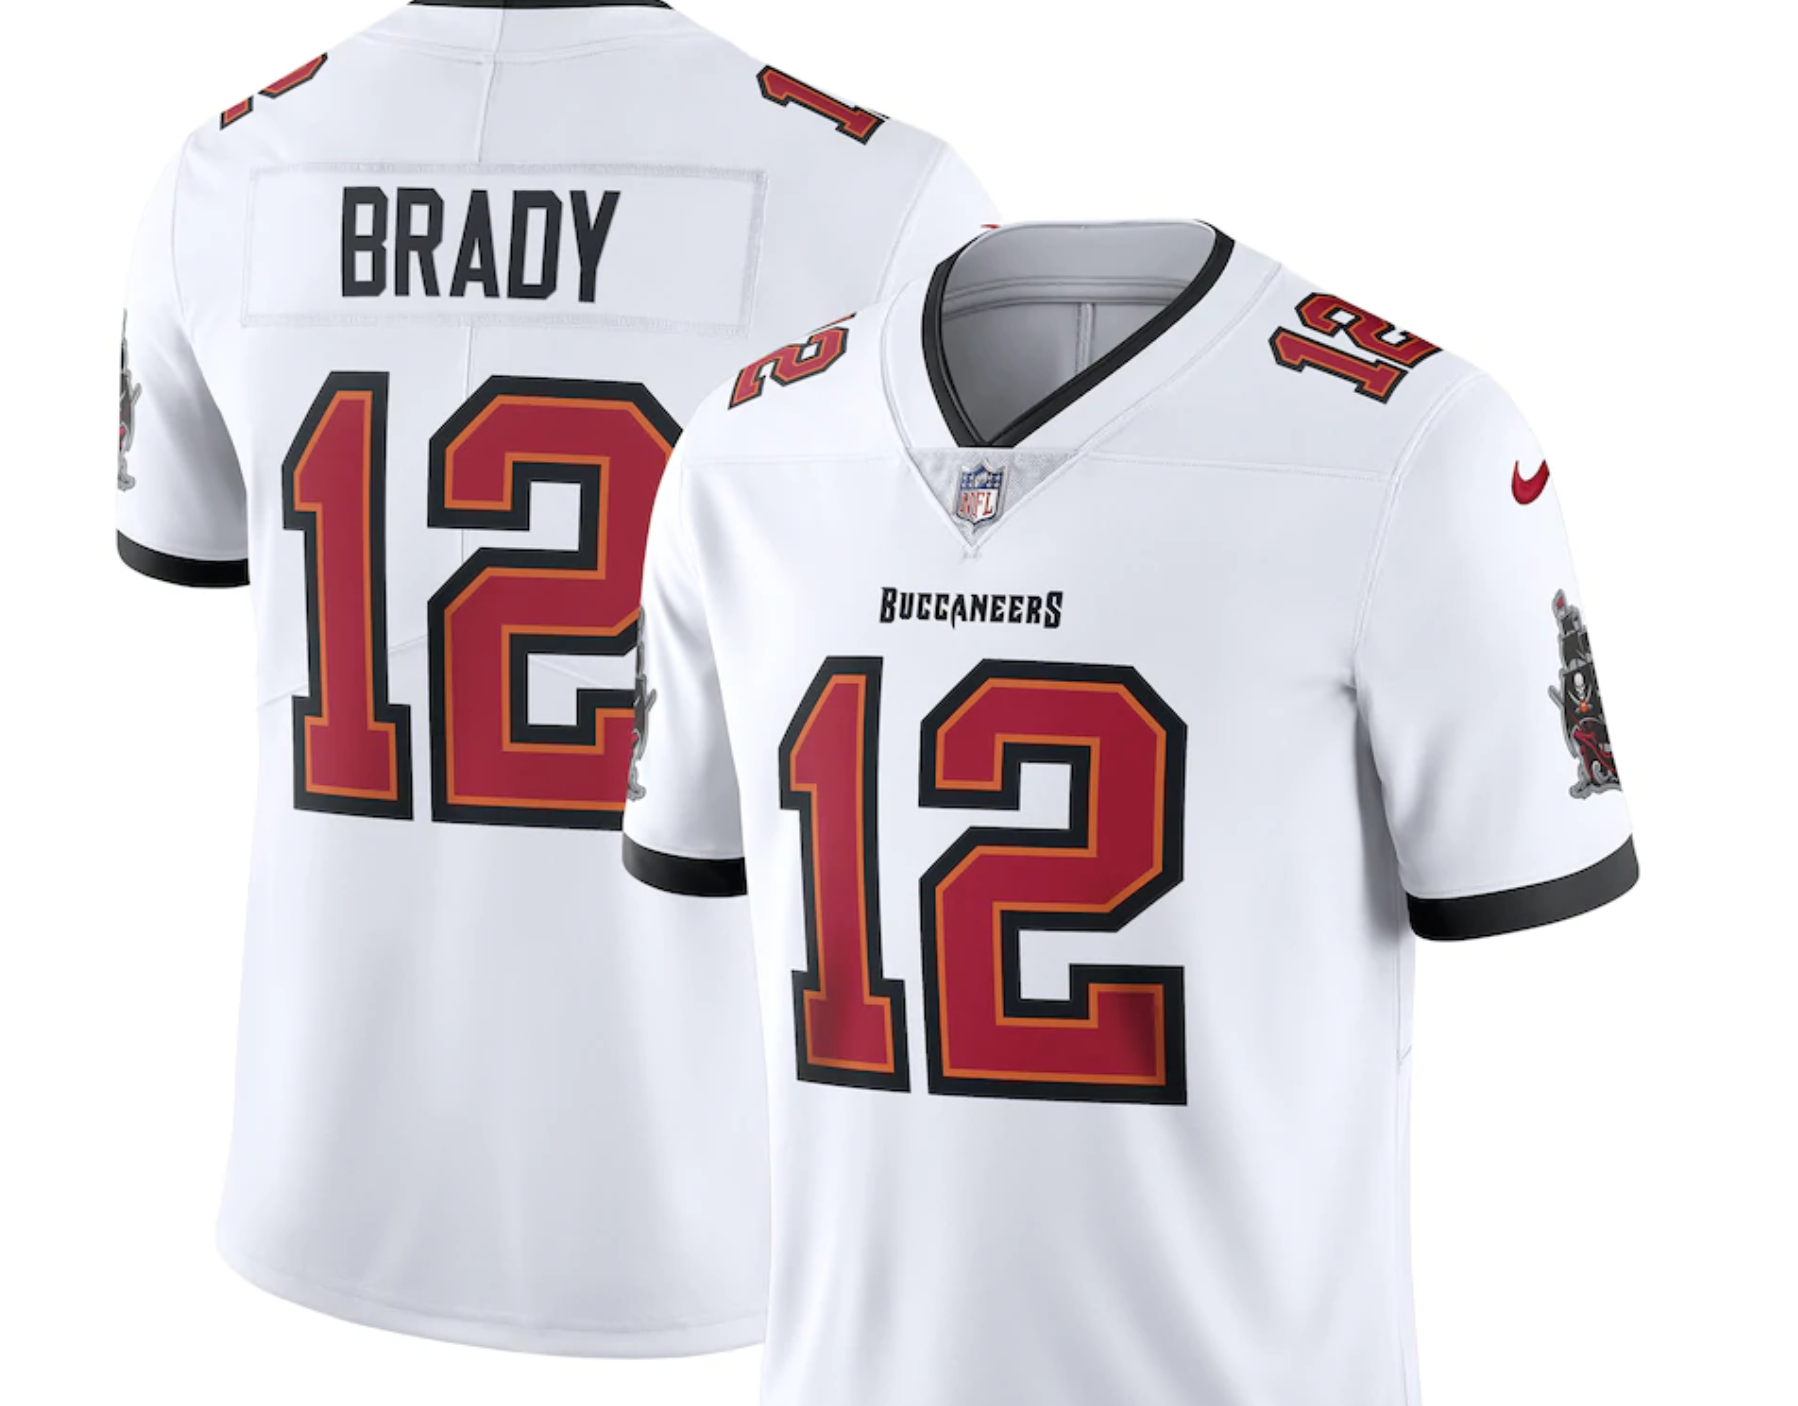 Buccaneers unveil pictures of Brady in his new jersey